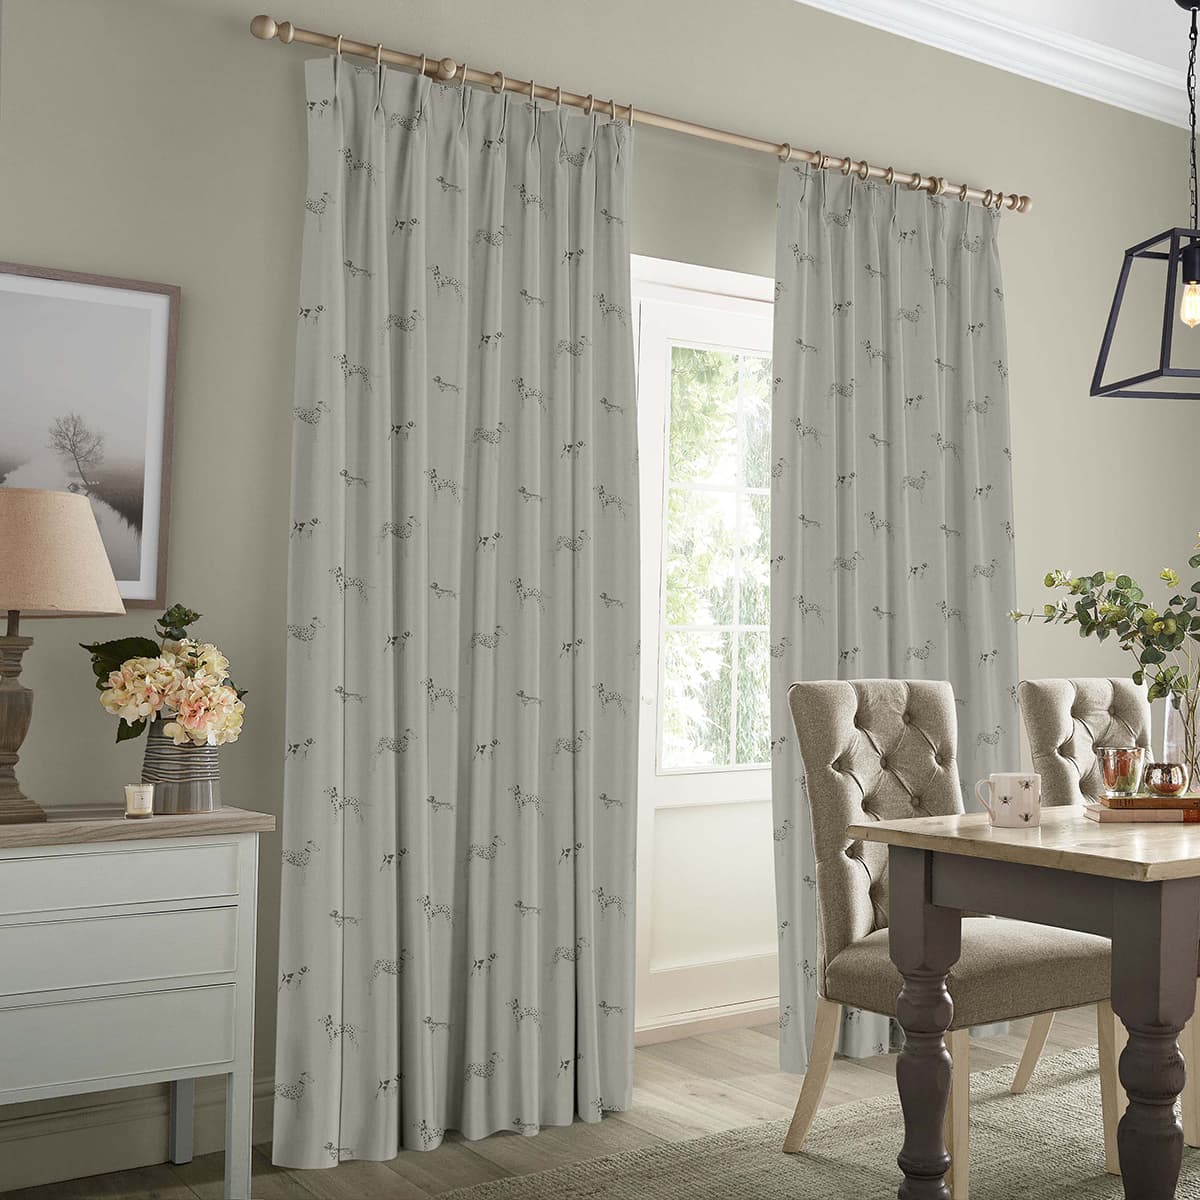 Fetch Warm Grey Made to Measure Curtains